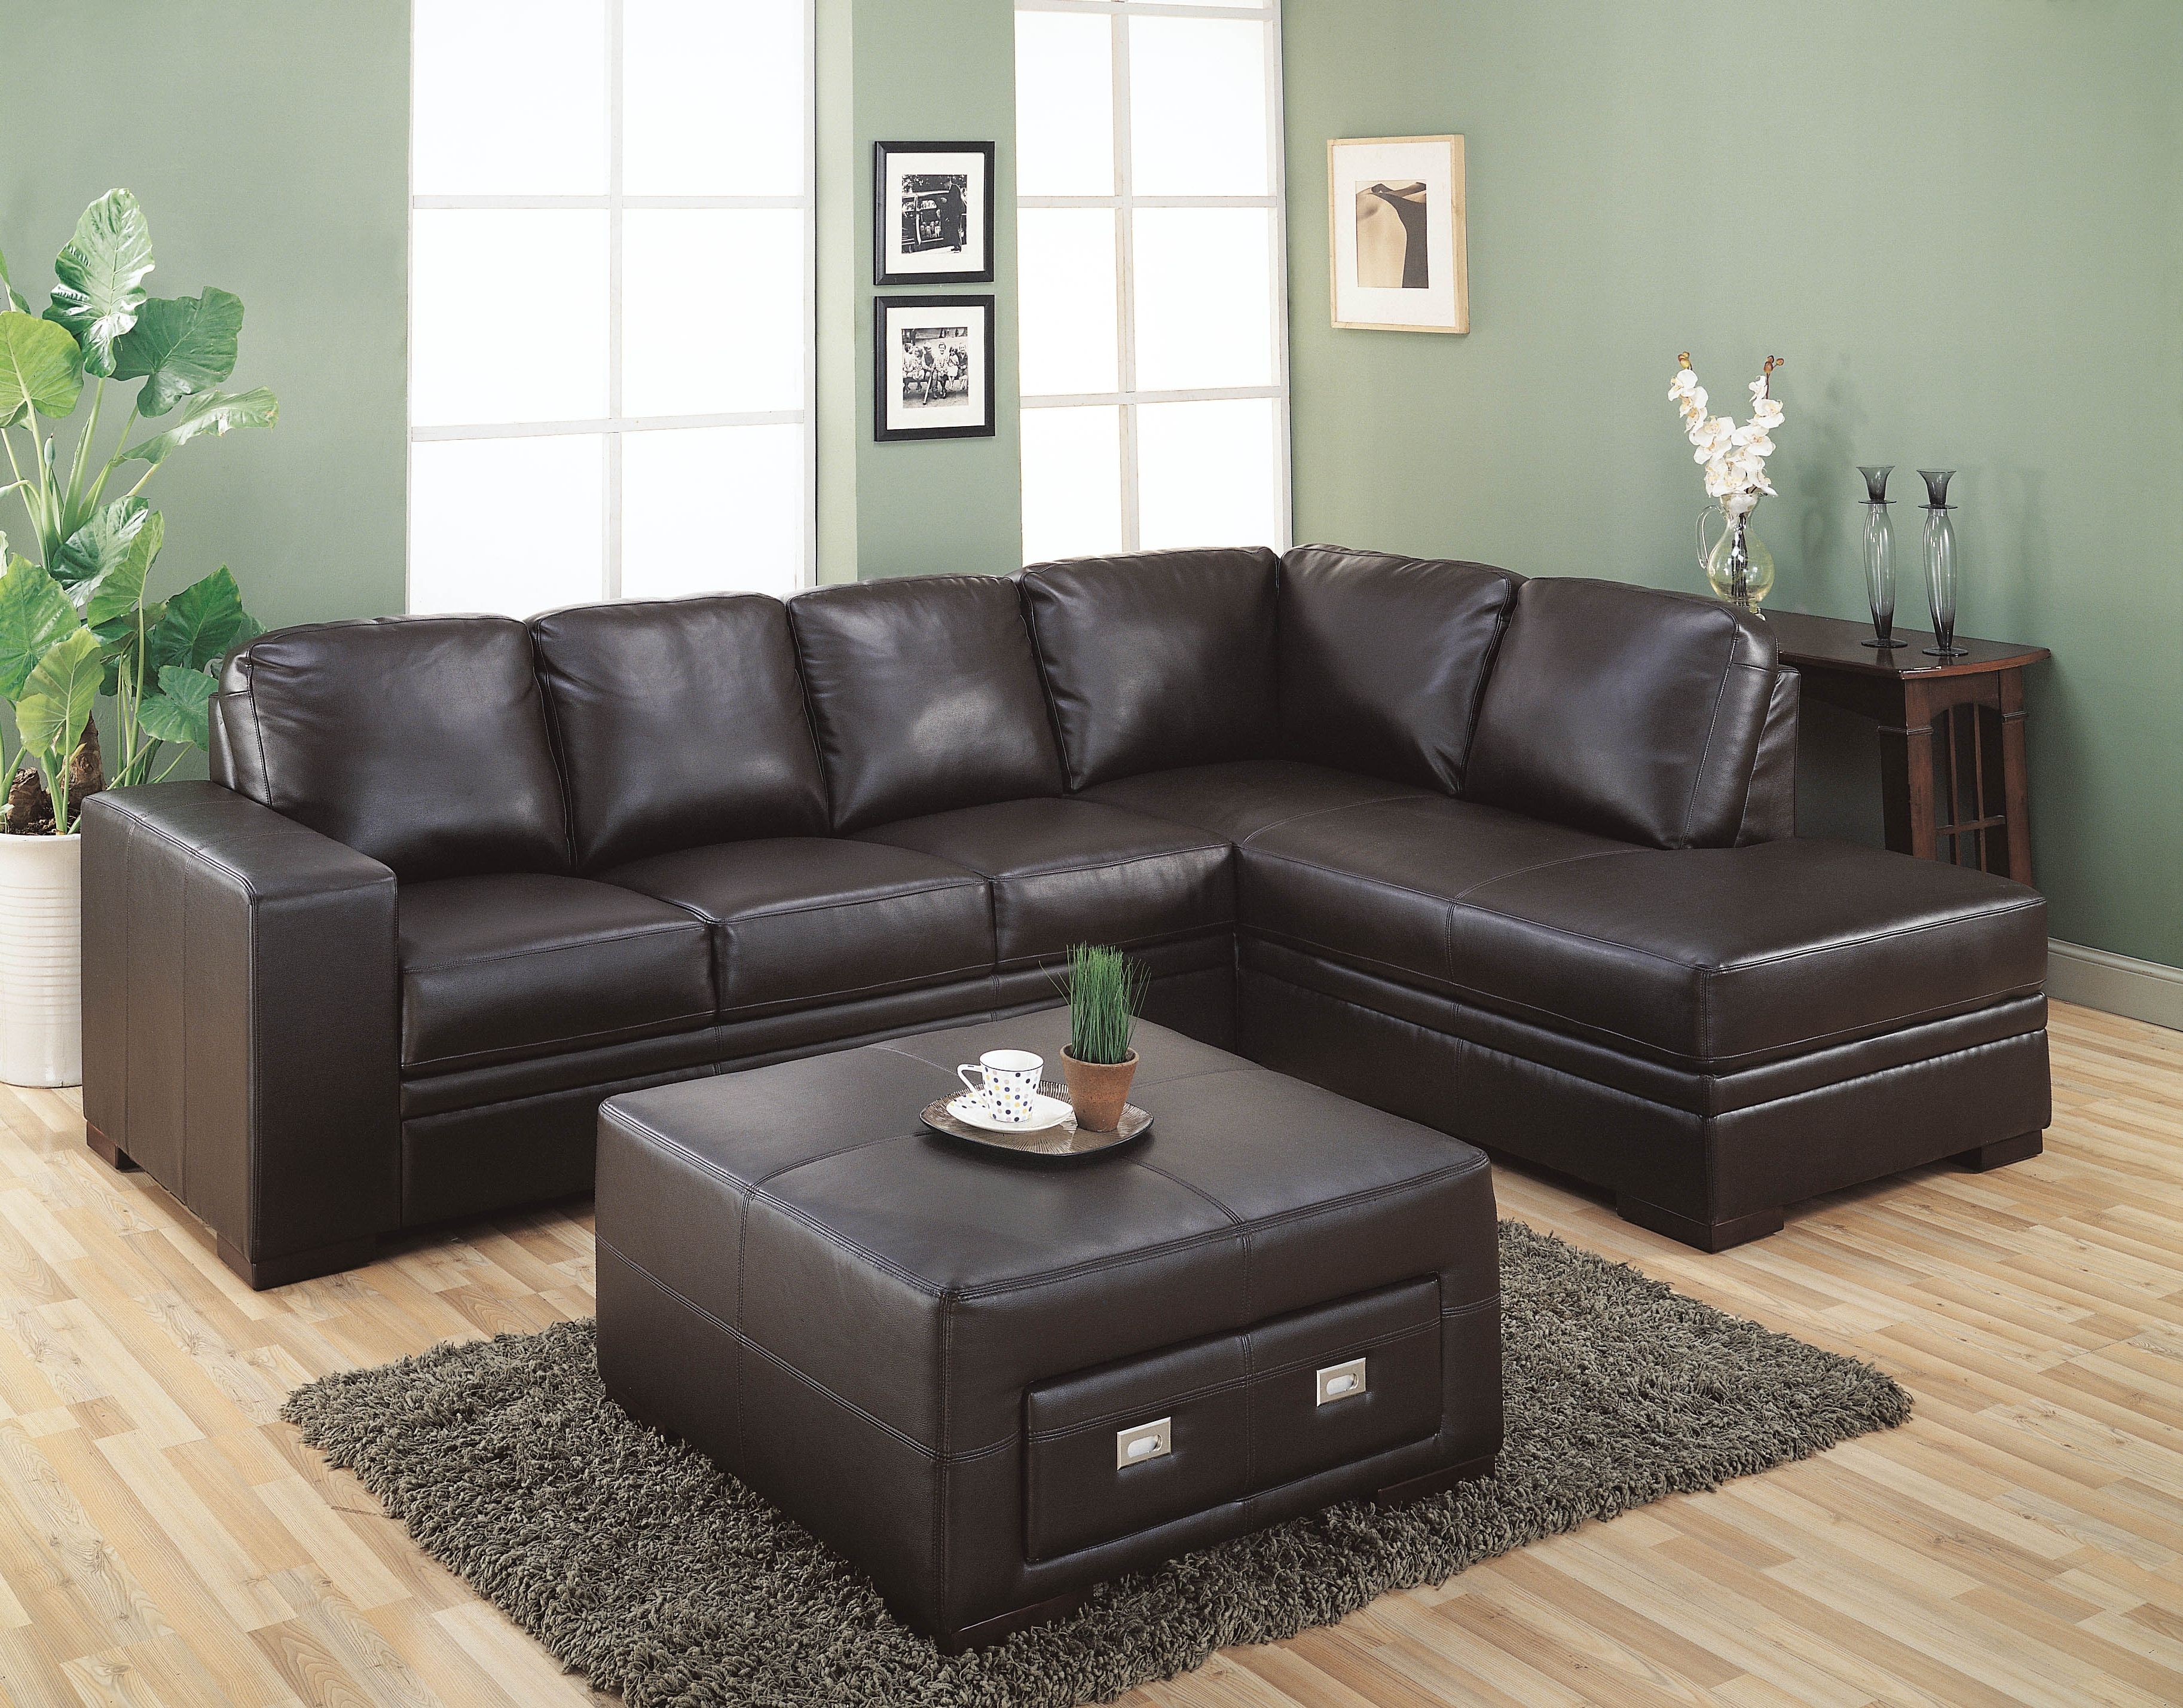 Fancy Chocolate Brown Sectional Sofa With Chaise 89 For Jcpenney Within Widely Used Jcpenney Sectional Sofas (View 11 of 20)